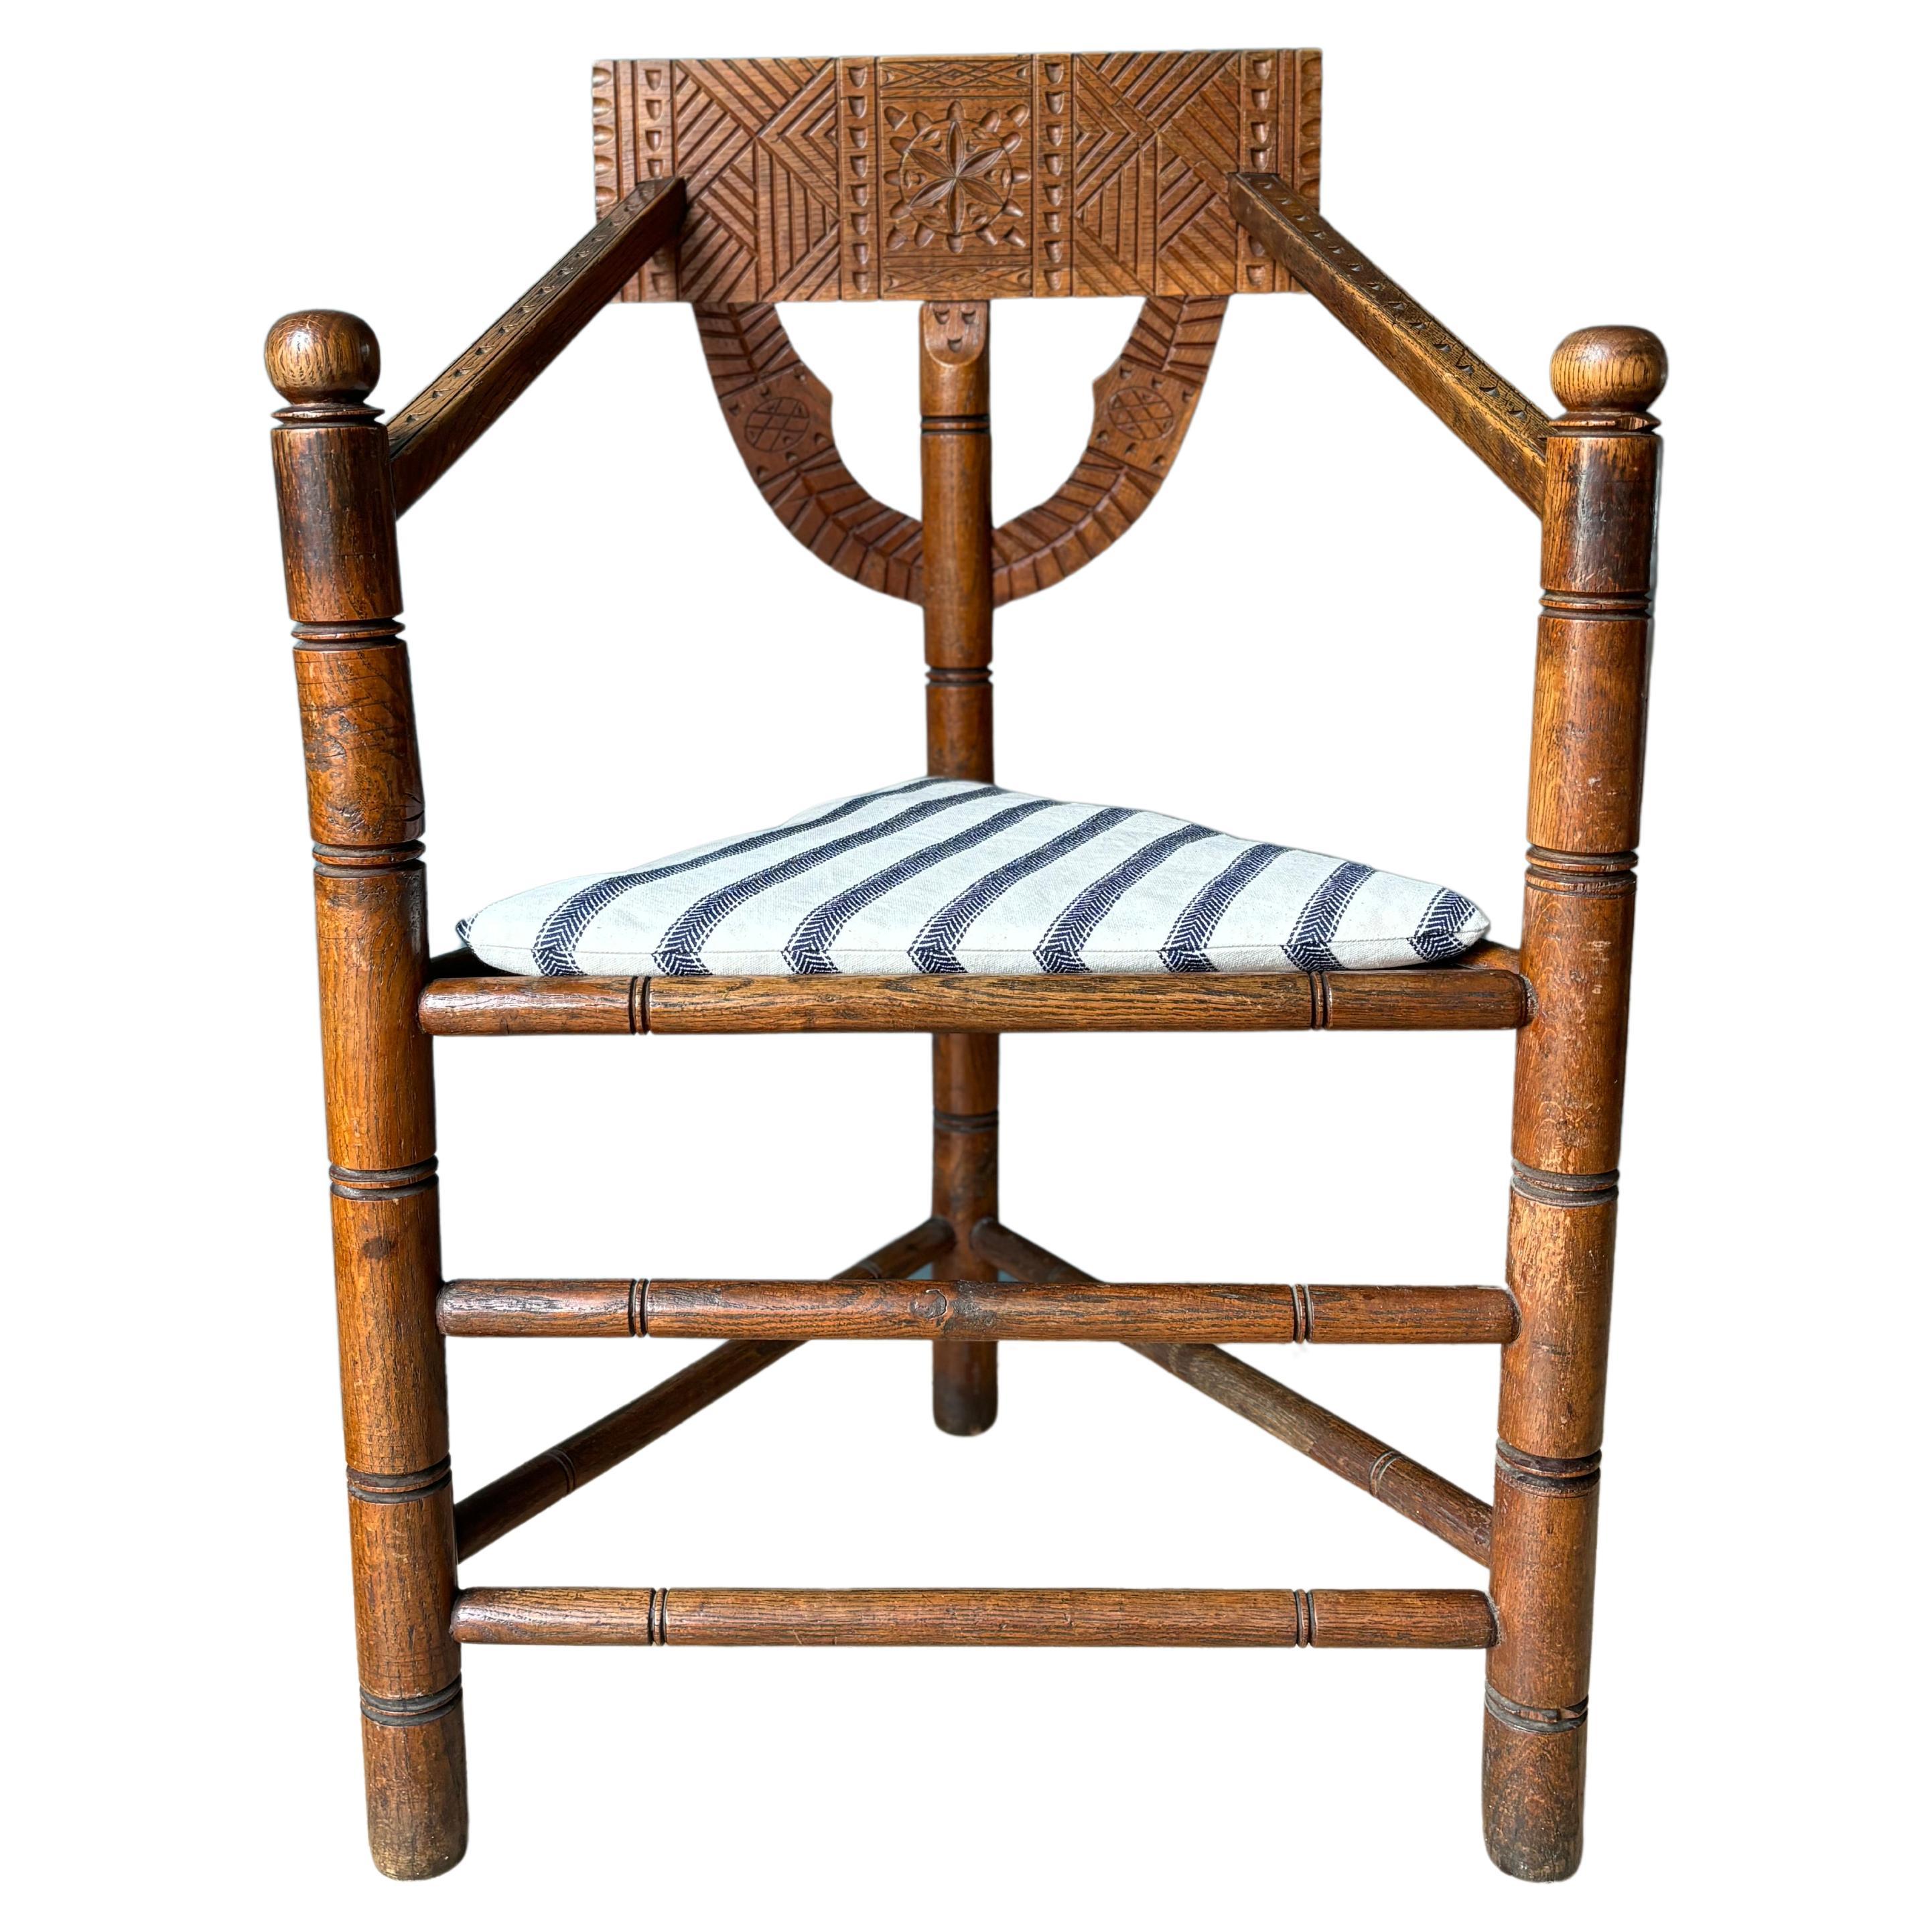 Swedish Antique Wooden "Monk" Chair, Early 1900s